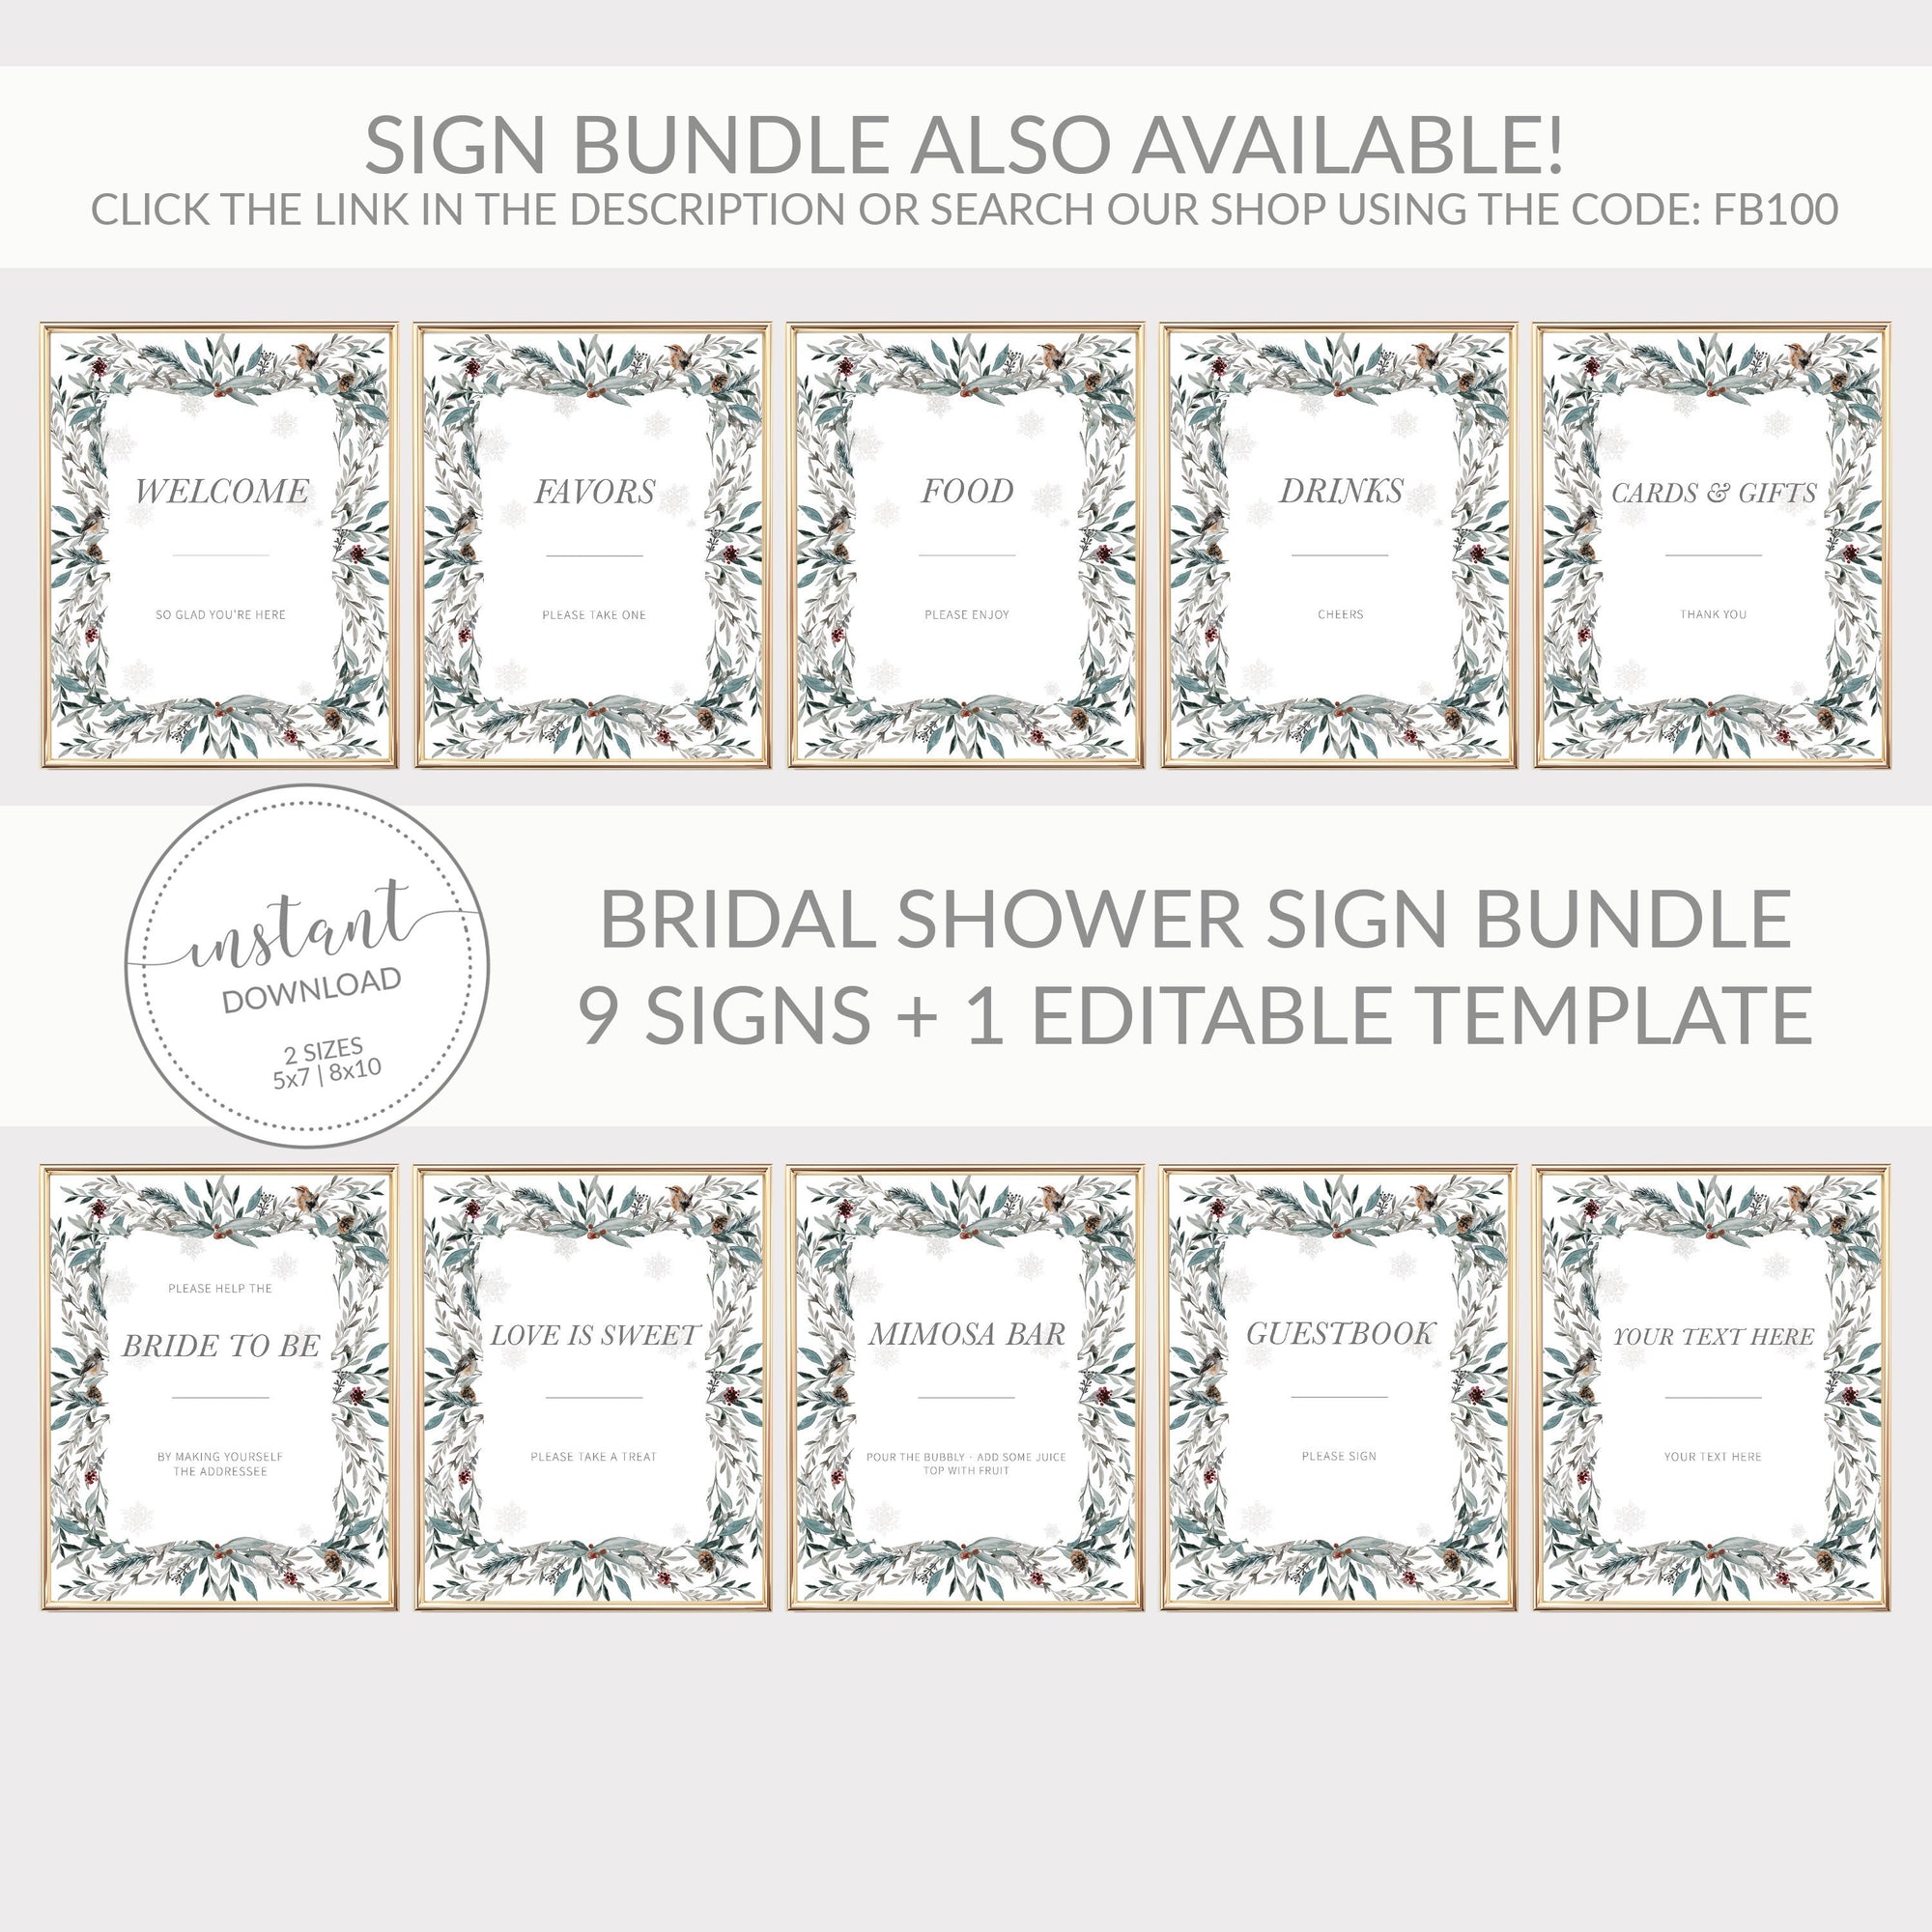 Instant Printable Mimosa Bar Kit Instant Download Wedding 